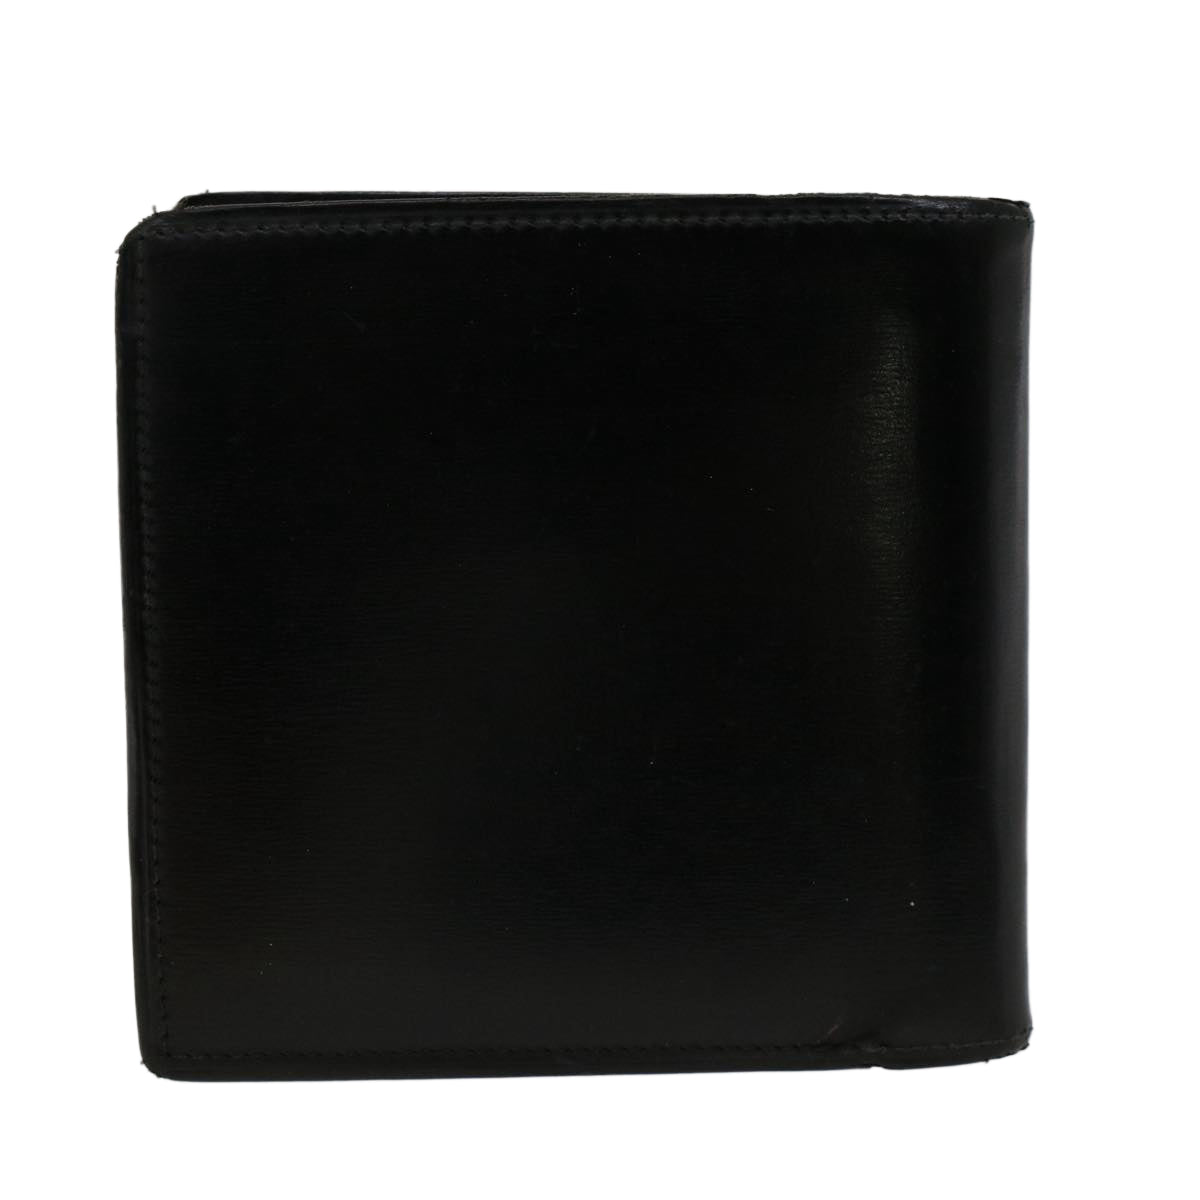 CARTIER Wallet Leather Black Auth 50843